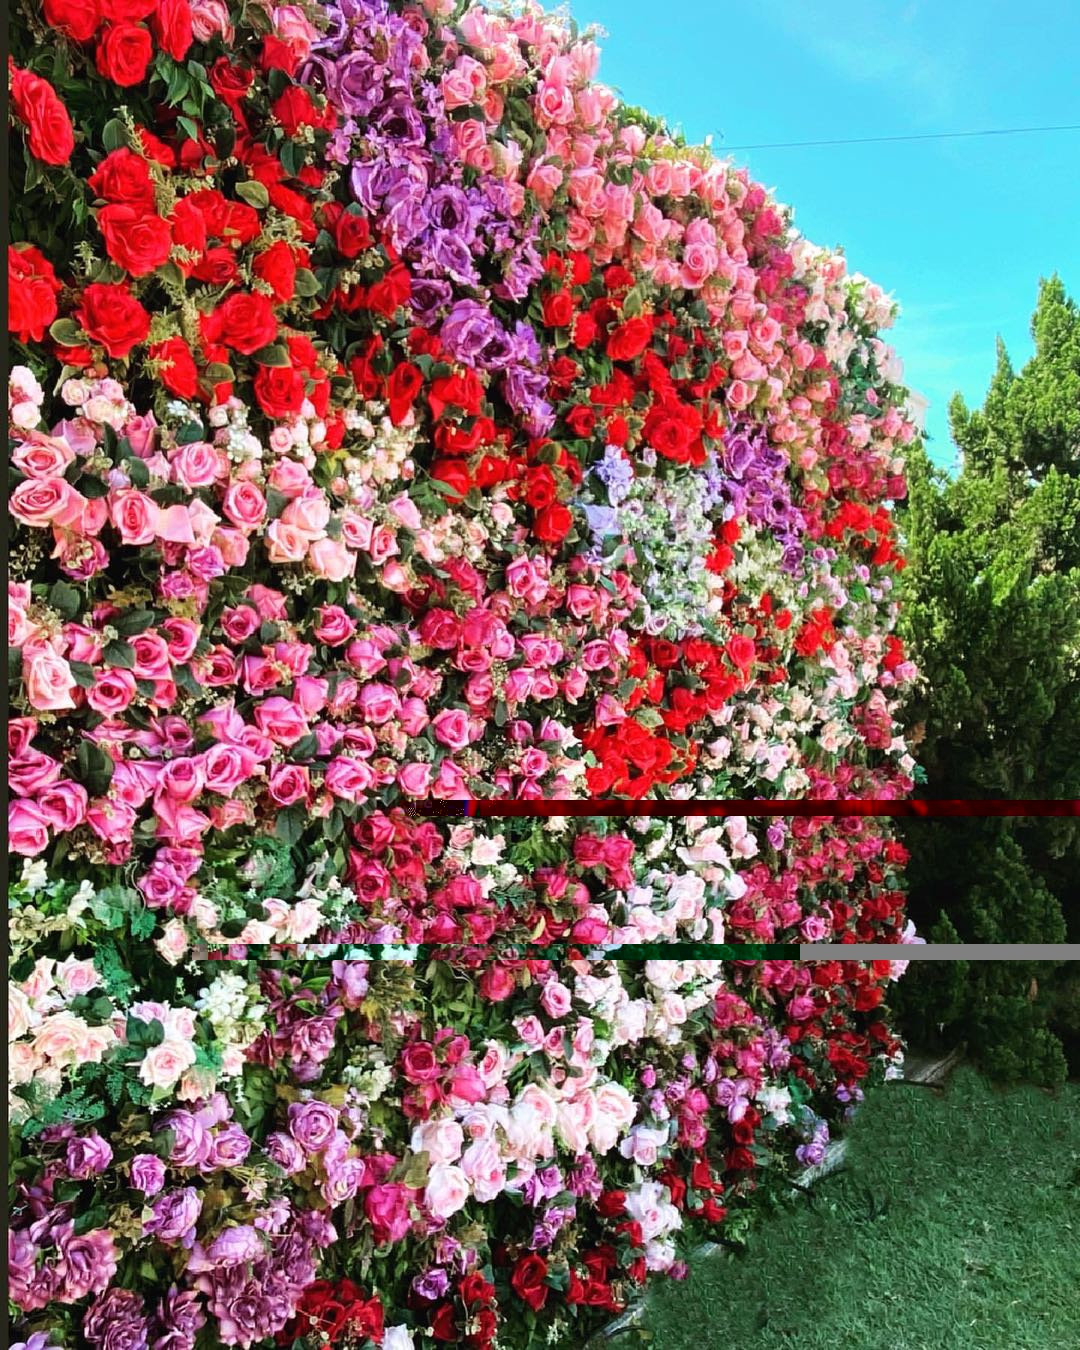 The flower walls are made of artificial flowers in various colors, layered at different levels to create a lush, elegant and natural look. The exclusive zipper design and roll-up design make it easy to install and remove.Rose Morning